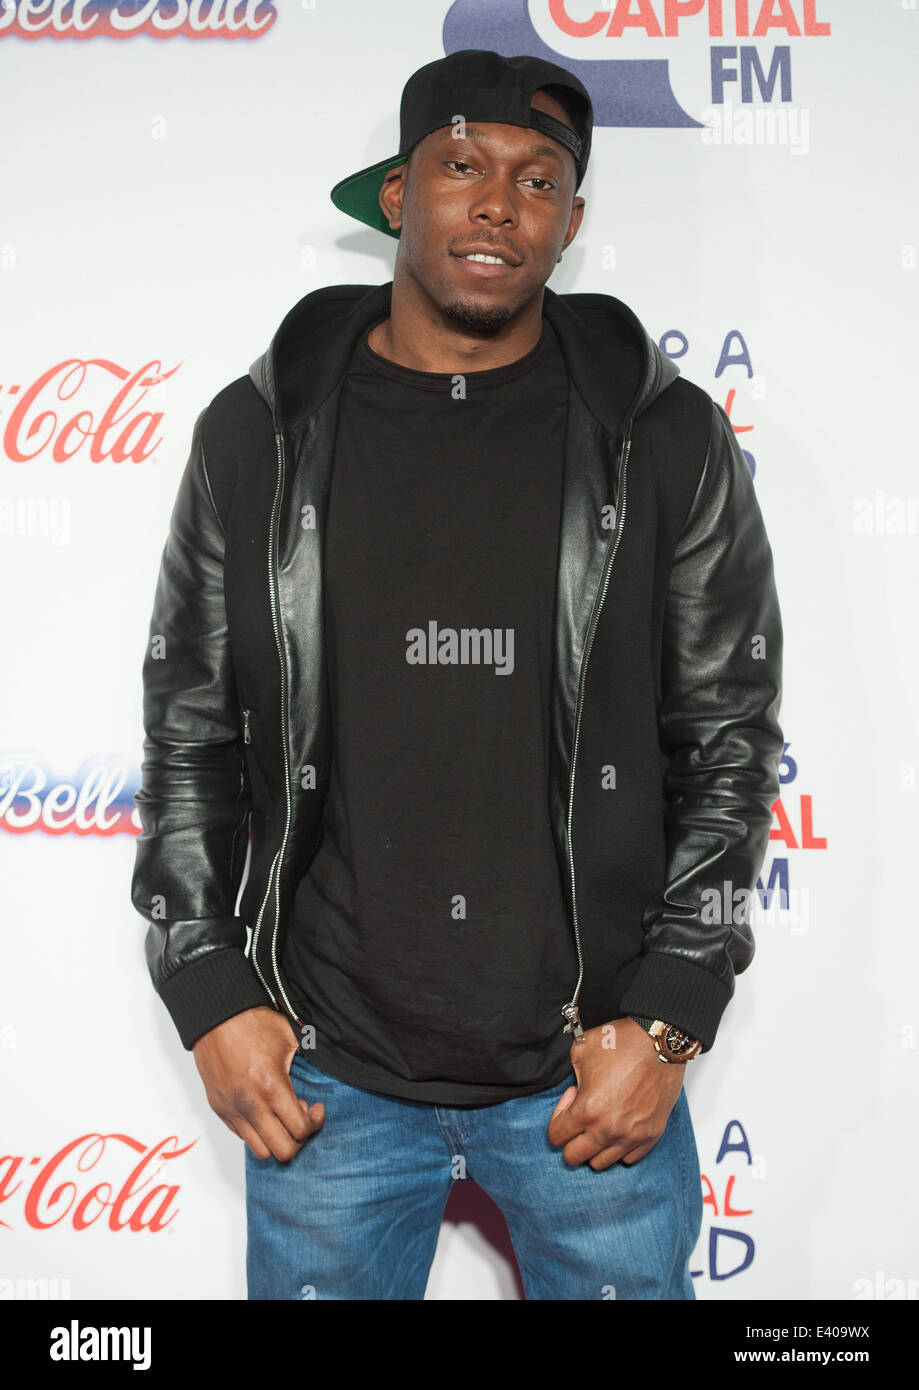 Capital FM Jingle Bell Ball 2013 held at the O2 arena - Day 2 - Arrivals  Featuring: Dizzee Rascal Where: London, United Kingdom When: 08 Dec 2013 Stock Photo